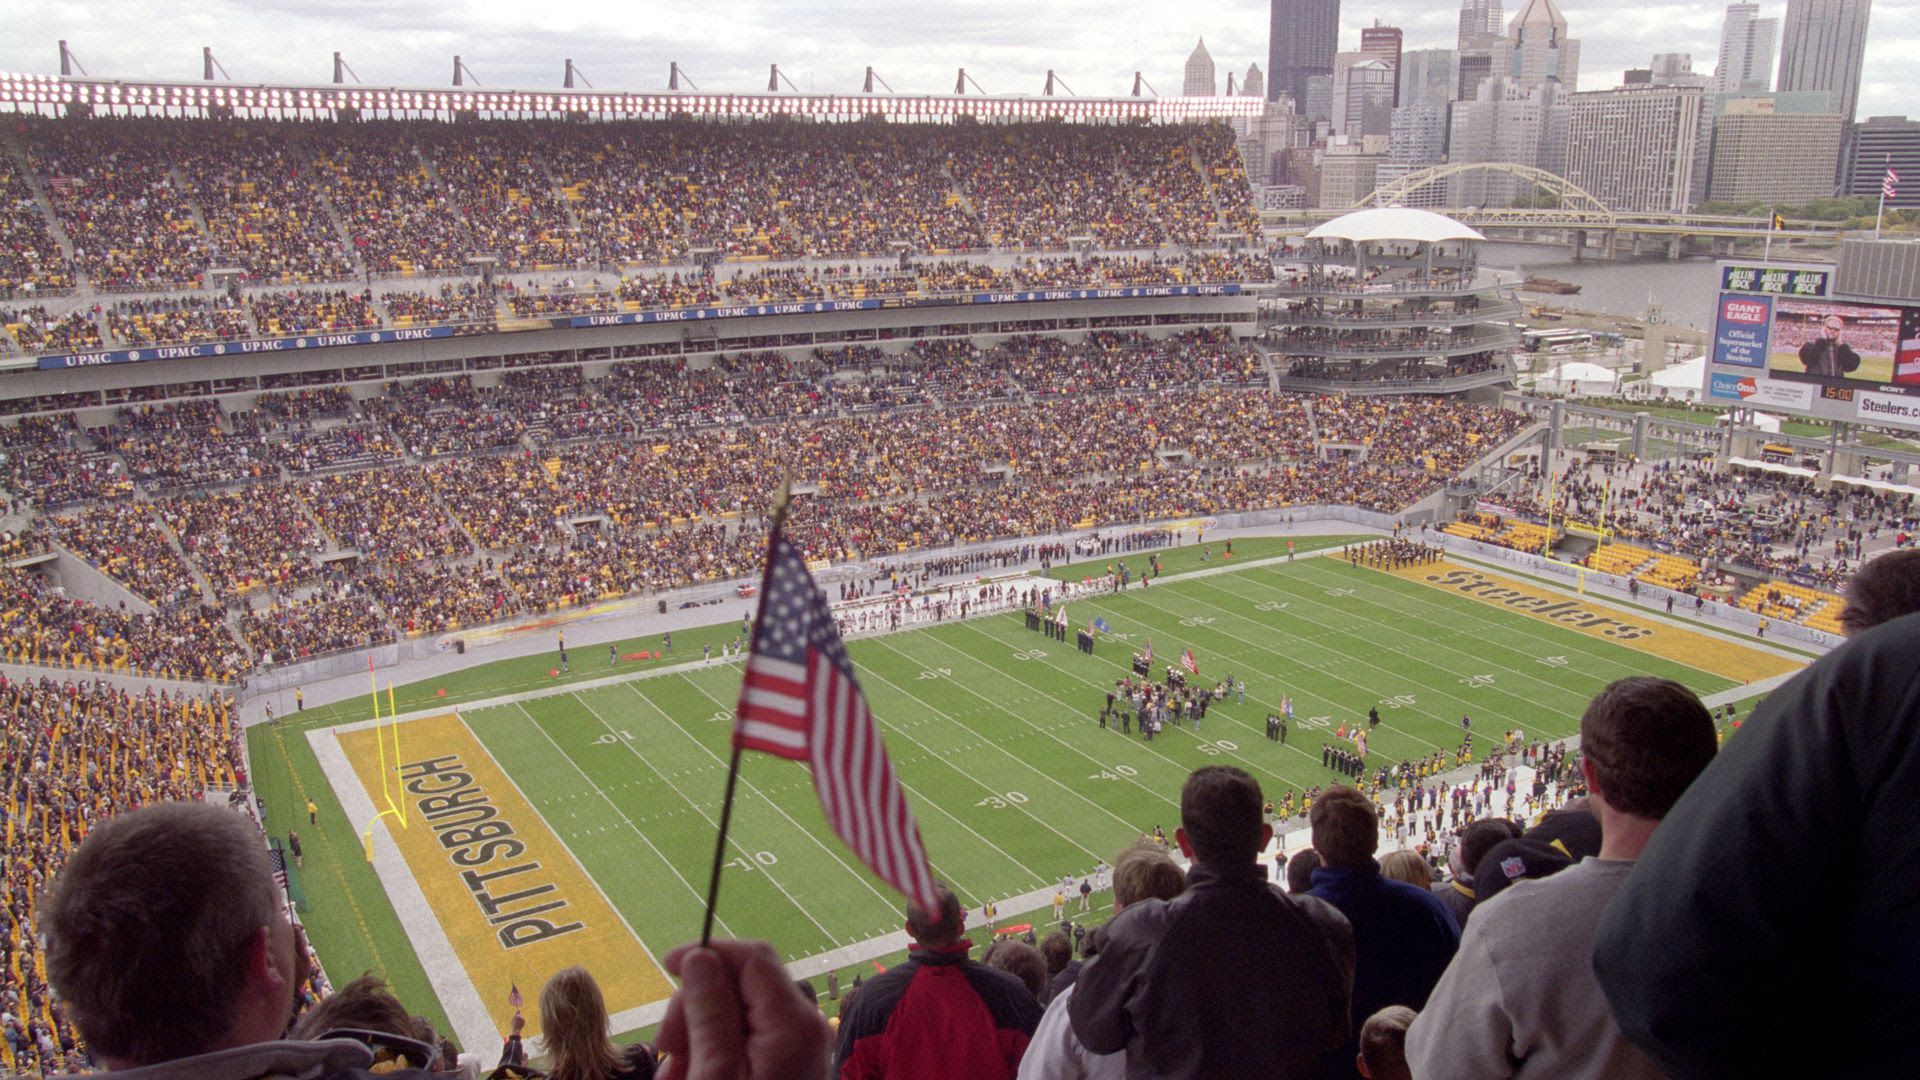 The Steelers' first-ever game at Heinz Field on Oct. 7, 2001